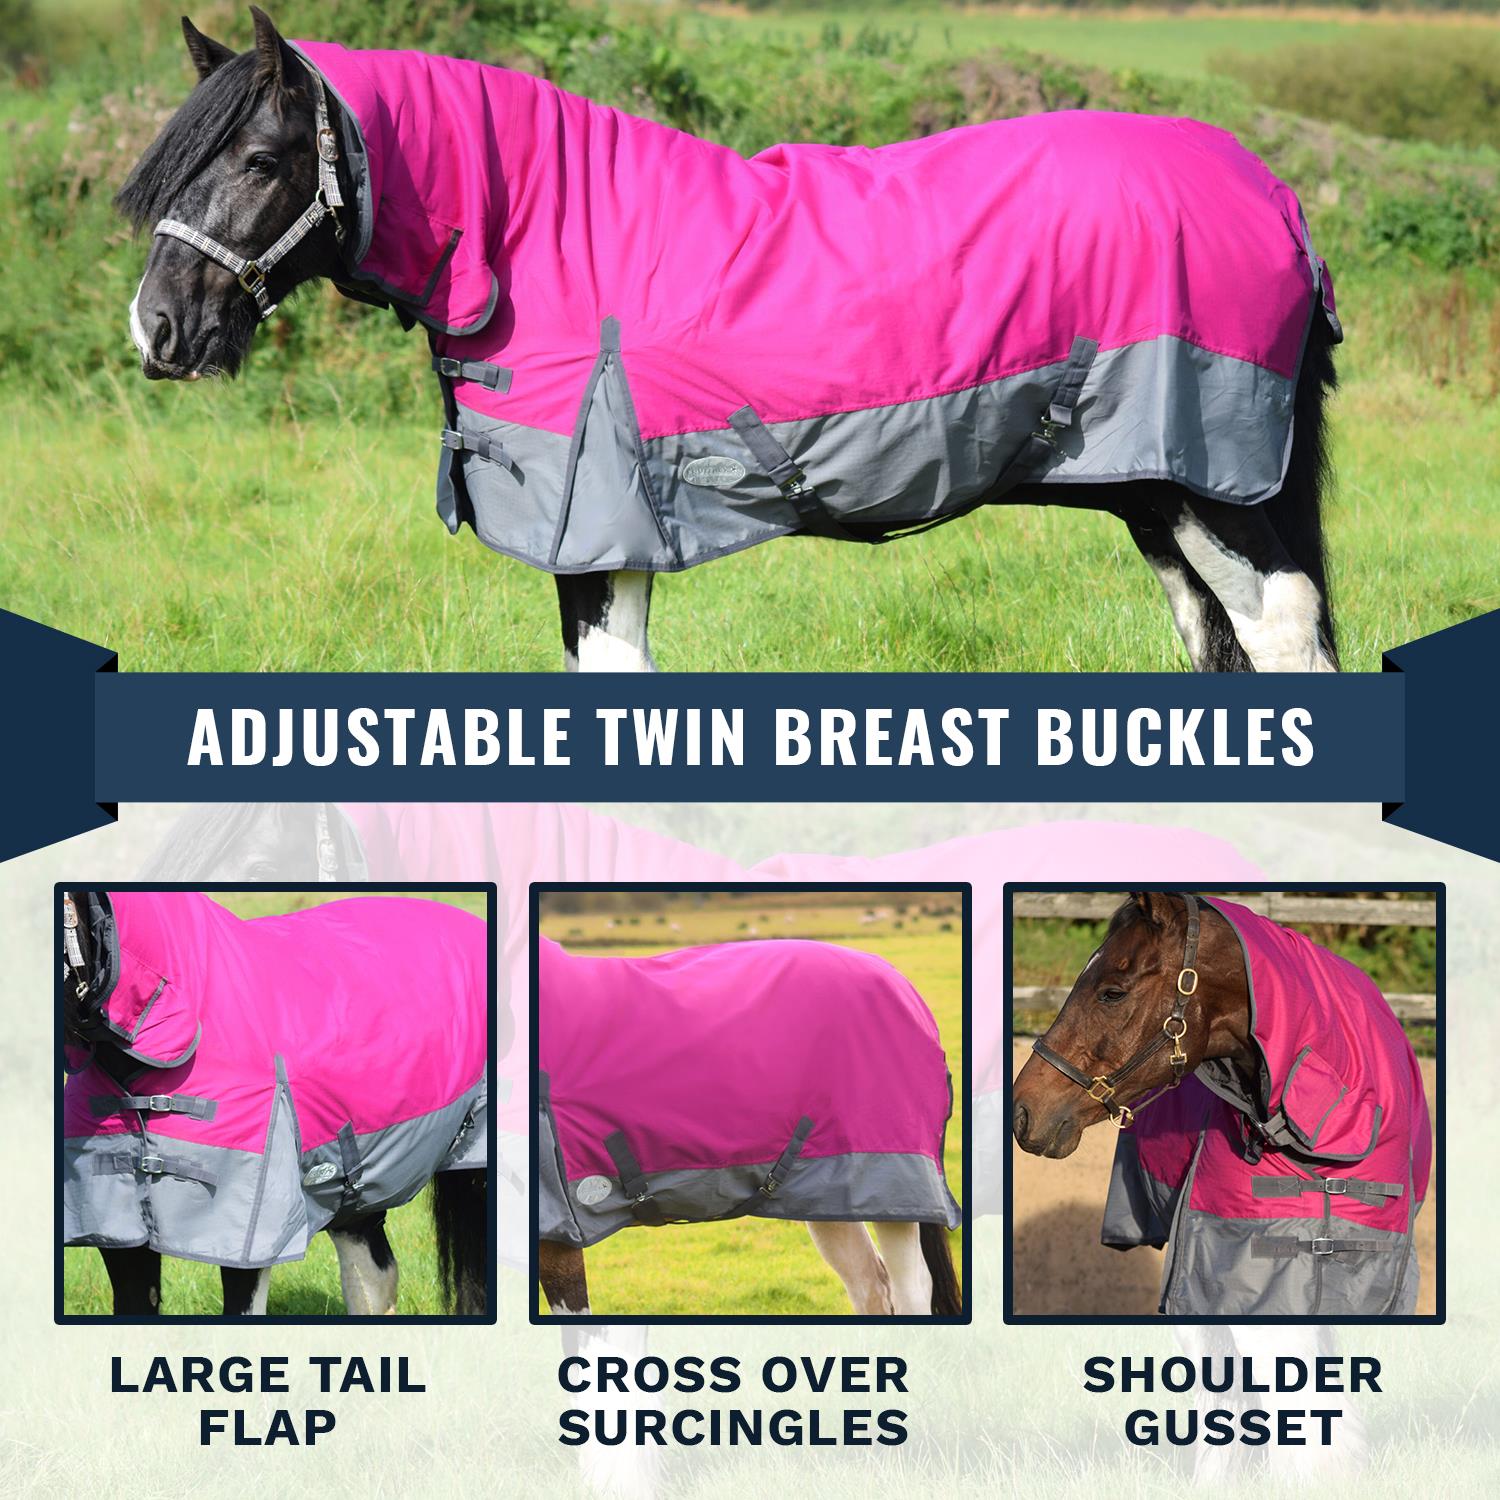 Outdoor Horse Turnout Durable Combo Neck Field 50g Rug Raspberry/Grey 5'3-6'9 - Tack24